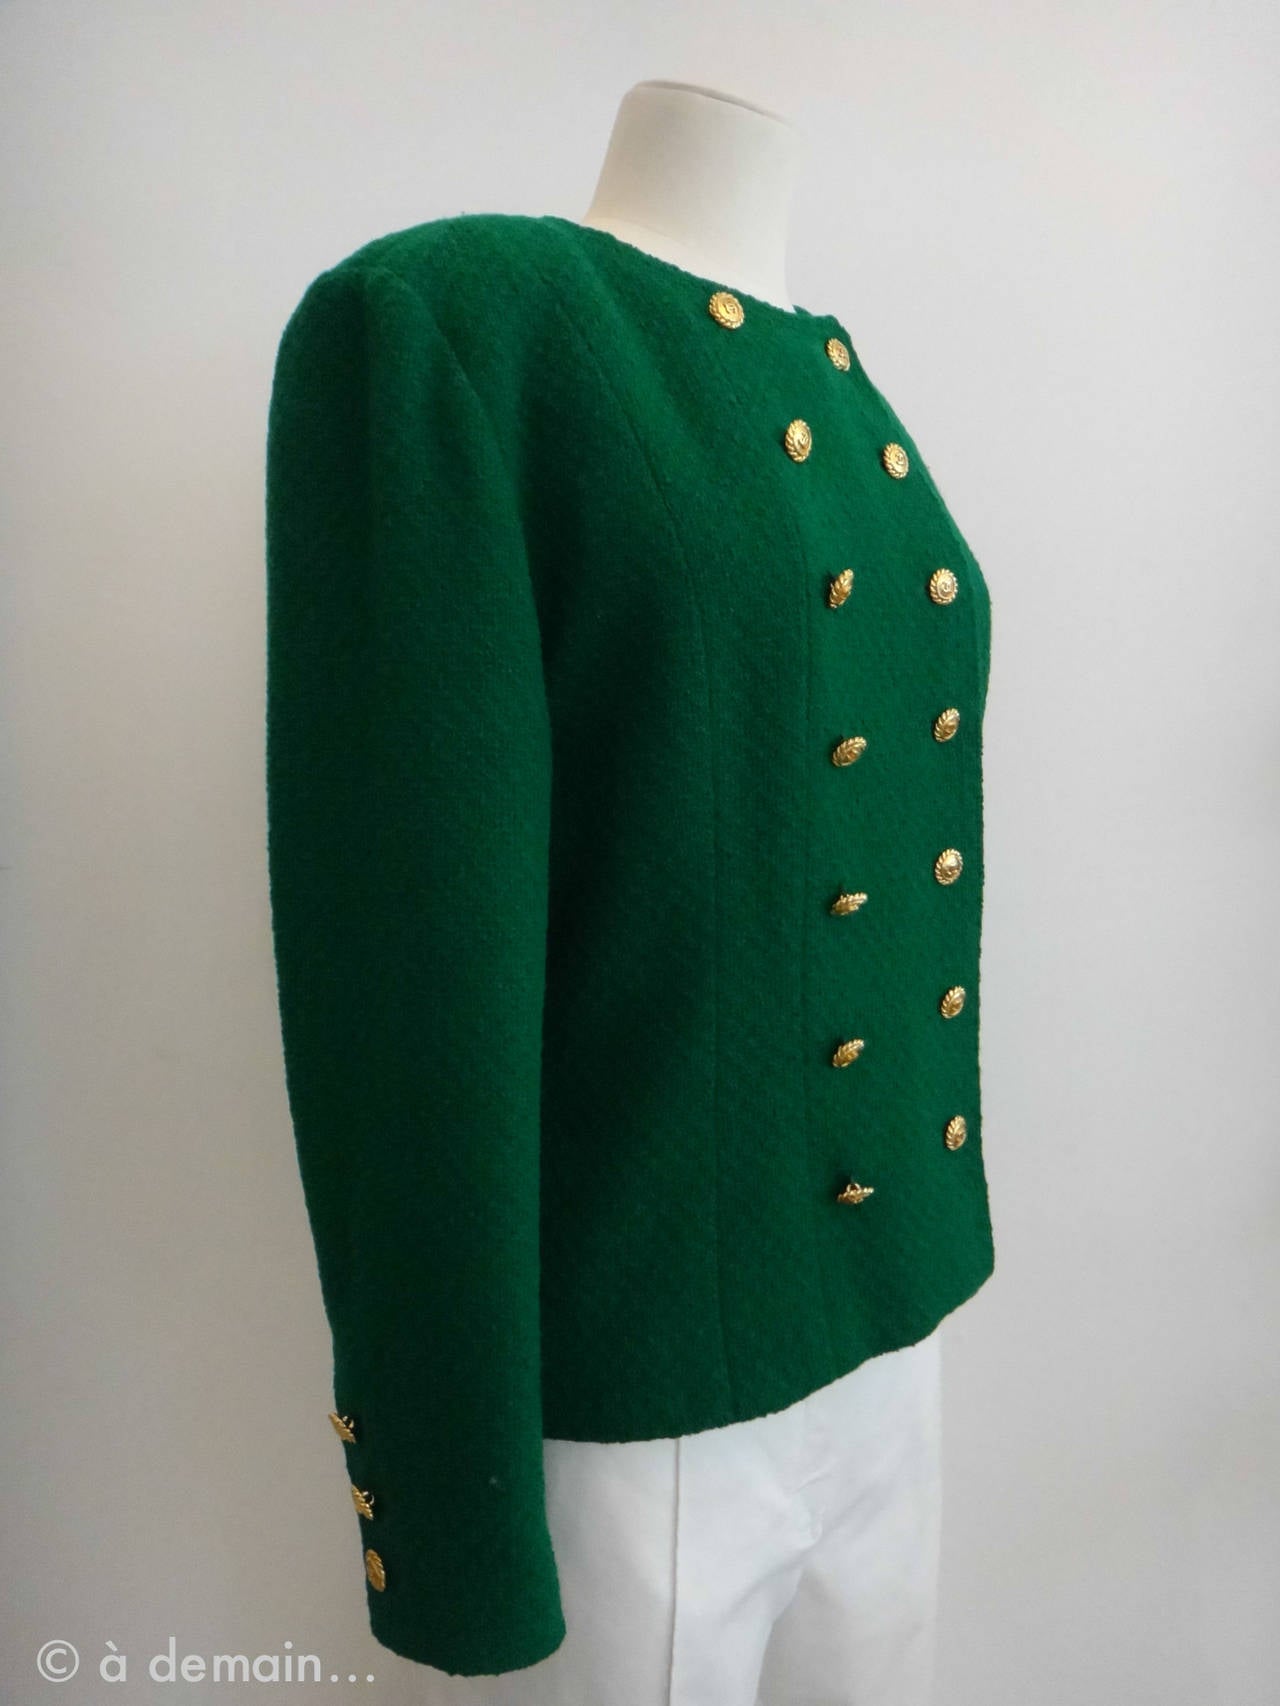 Pretty Chanel Boutique green jacket with a double row of X golden buttons. Silk linen with X and a small chain sewed at the inside border.

Shoulders: 38 cm
Armpits: 46 cm
Waist: 42 cm
Bottom: 48,5 cm
Front height: 48,5 cm